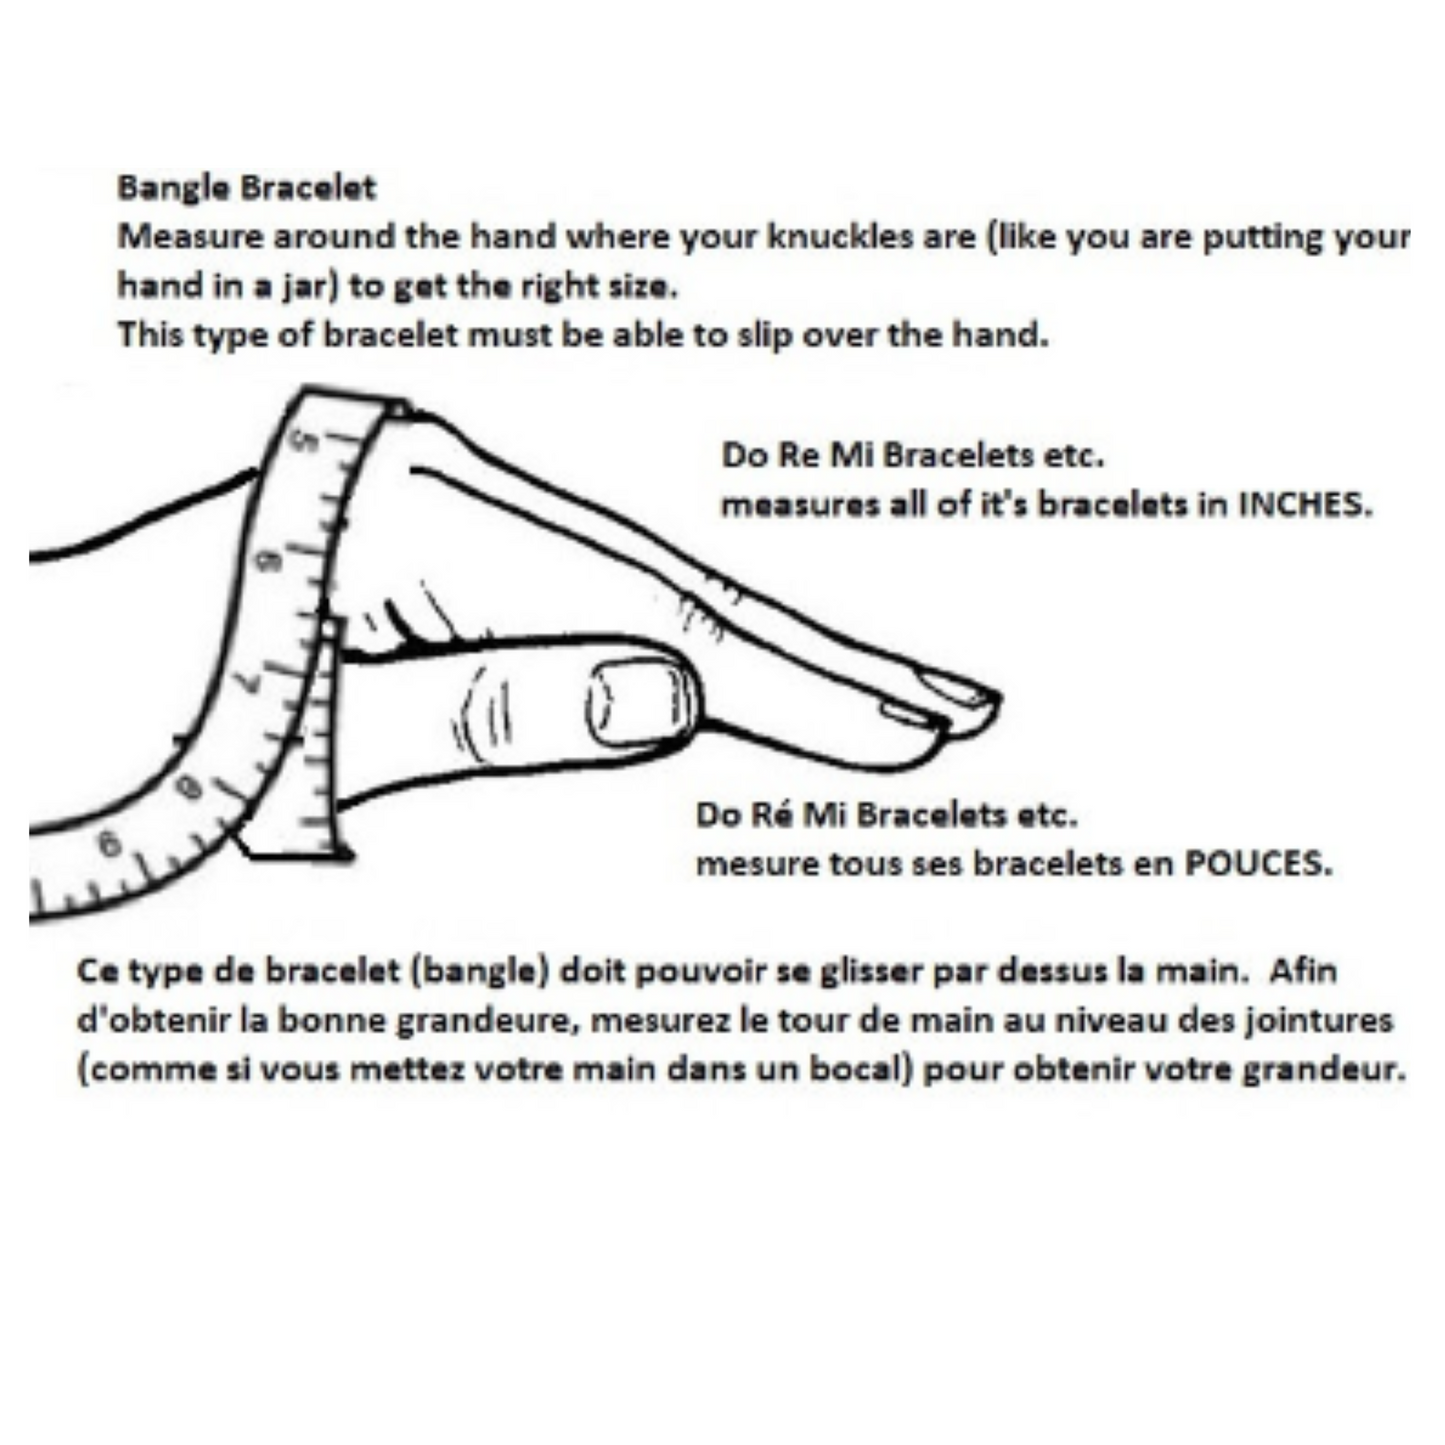 black outline of a hand and wrist with a tape measure around the hand on a white background - black words in french and in english are also written (instructions for how to measure)